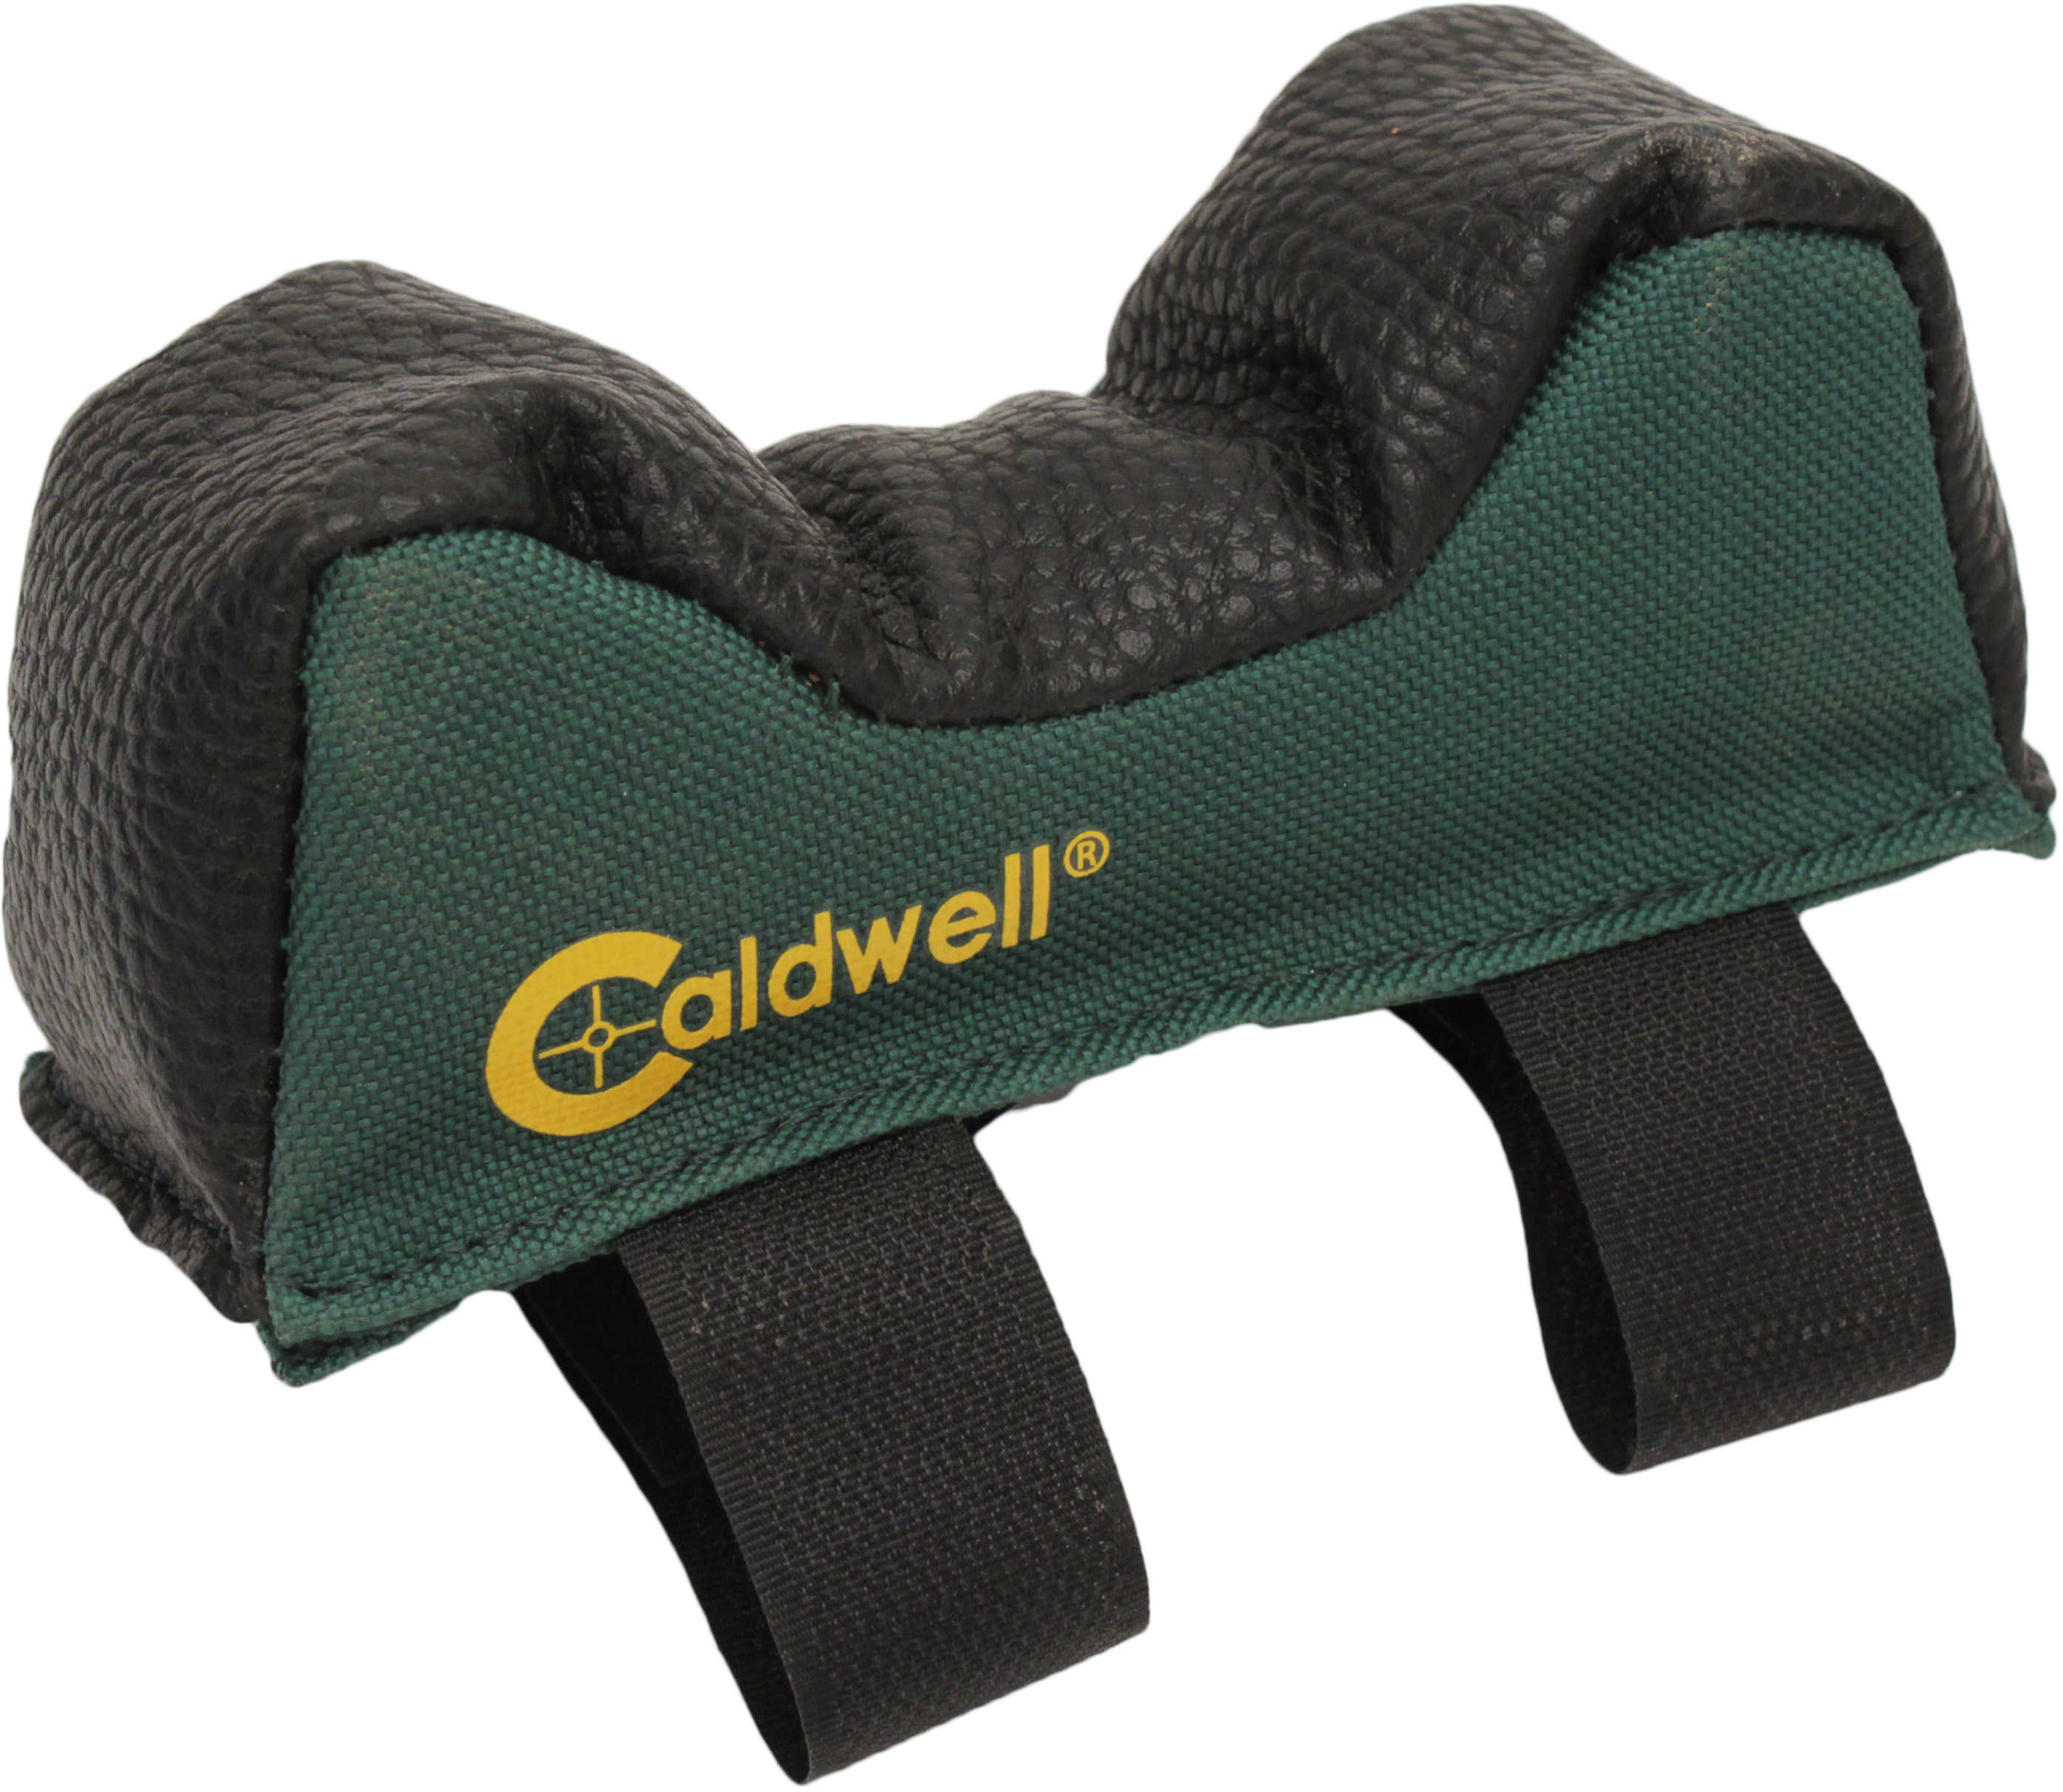 Caldwell Shooting Rest Bag Front Bag Filled Green W/Black Accents 600D Polyester W/Leather Padding